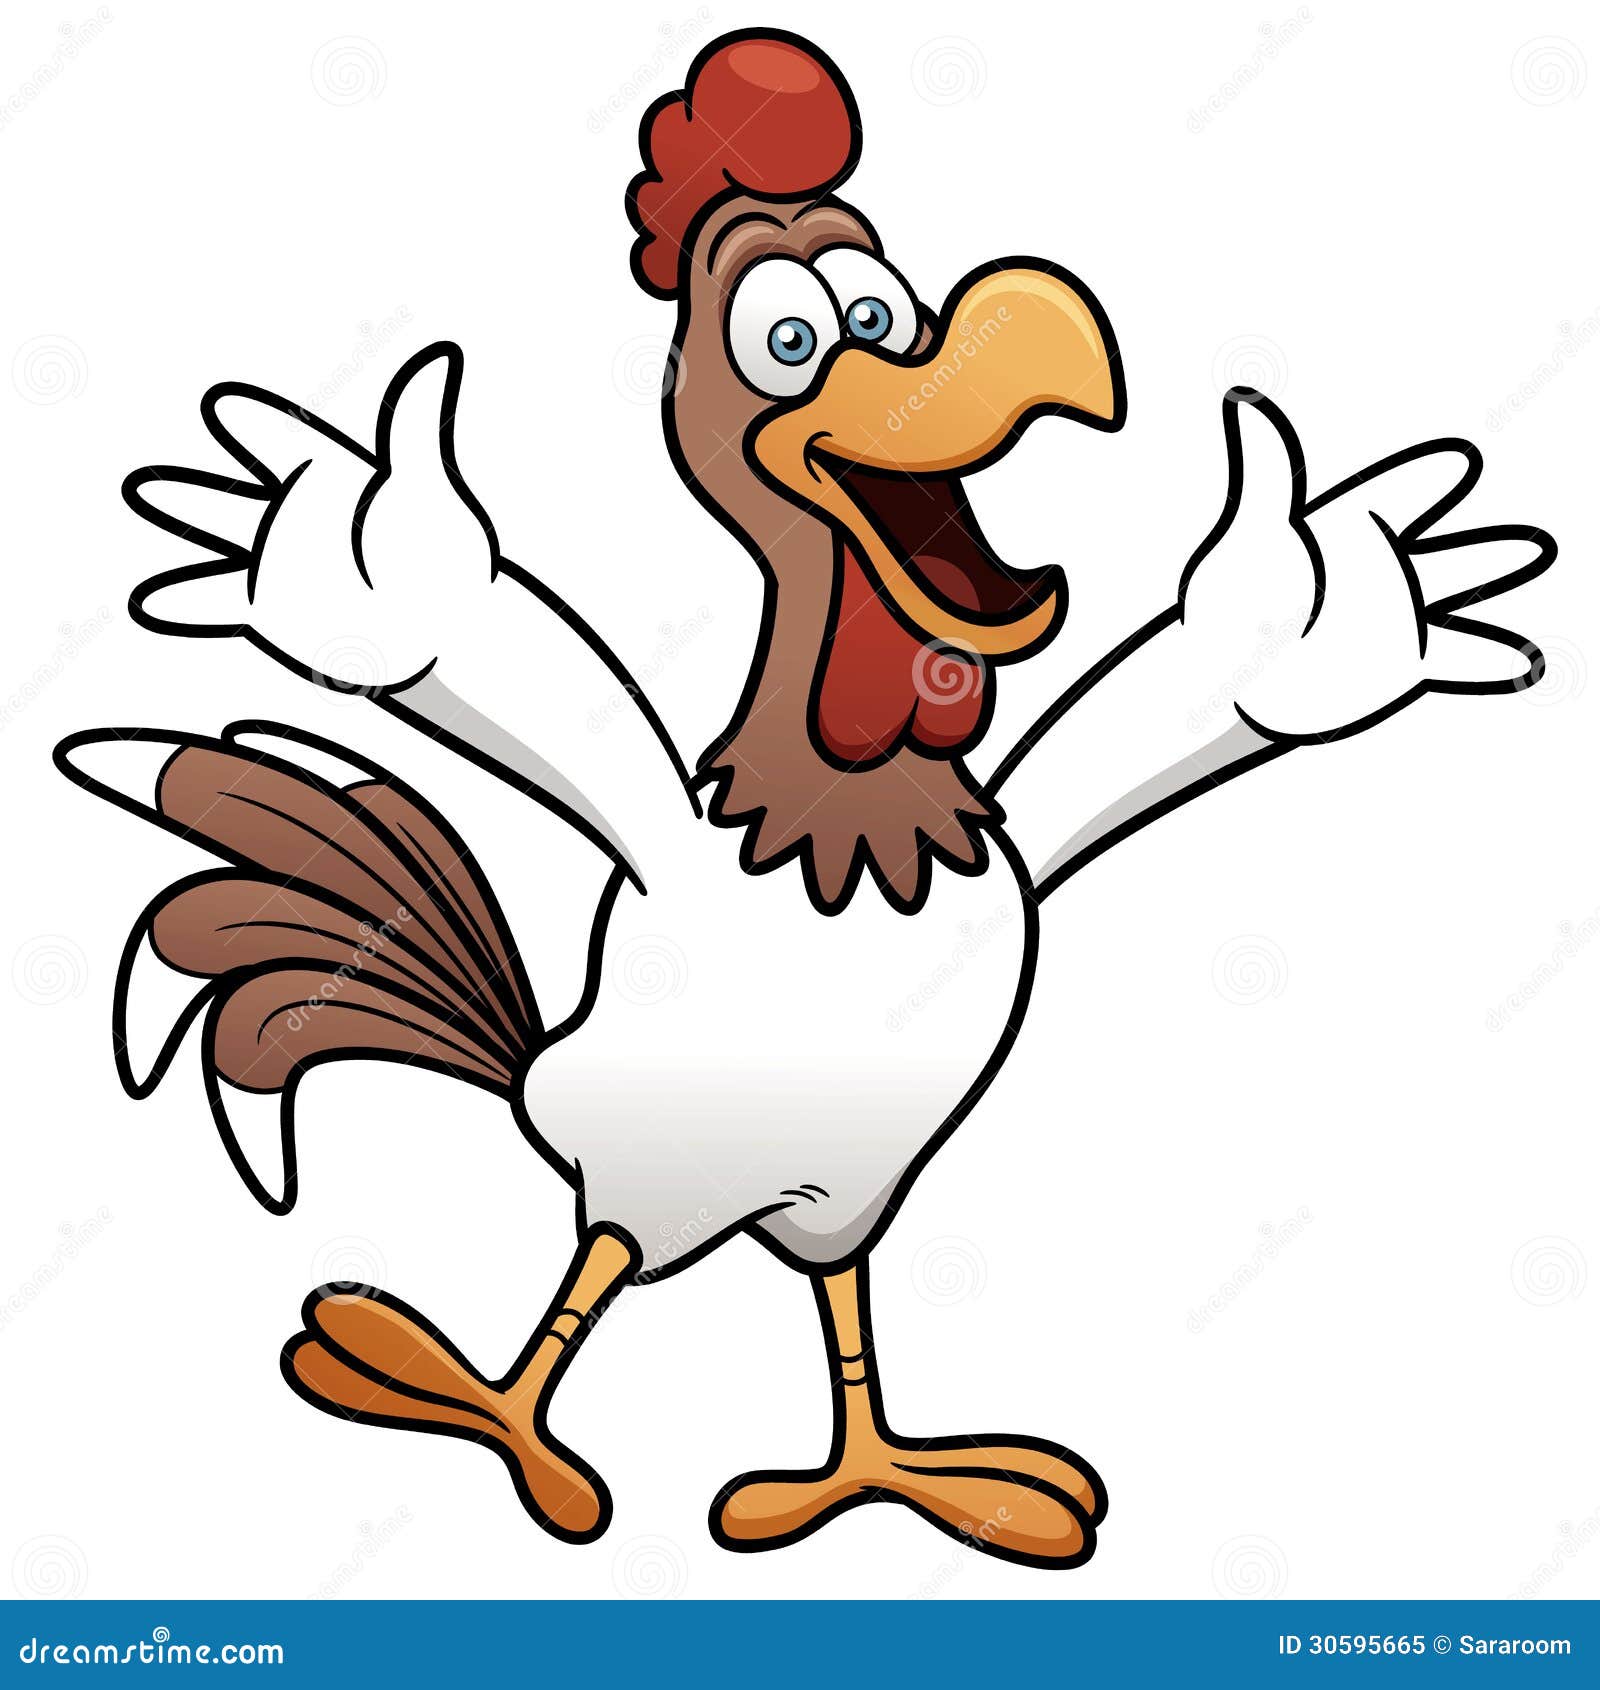 chicken clipart royalty free - photo #33